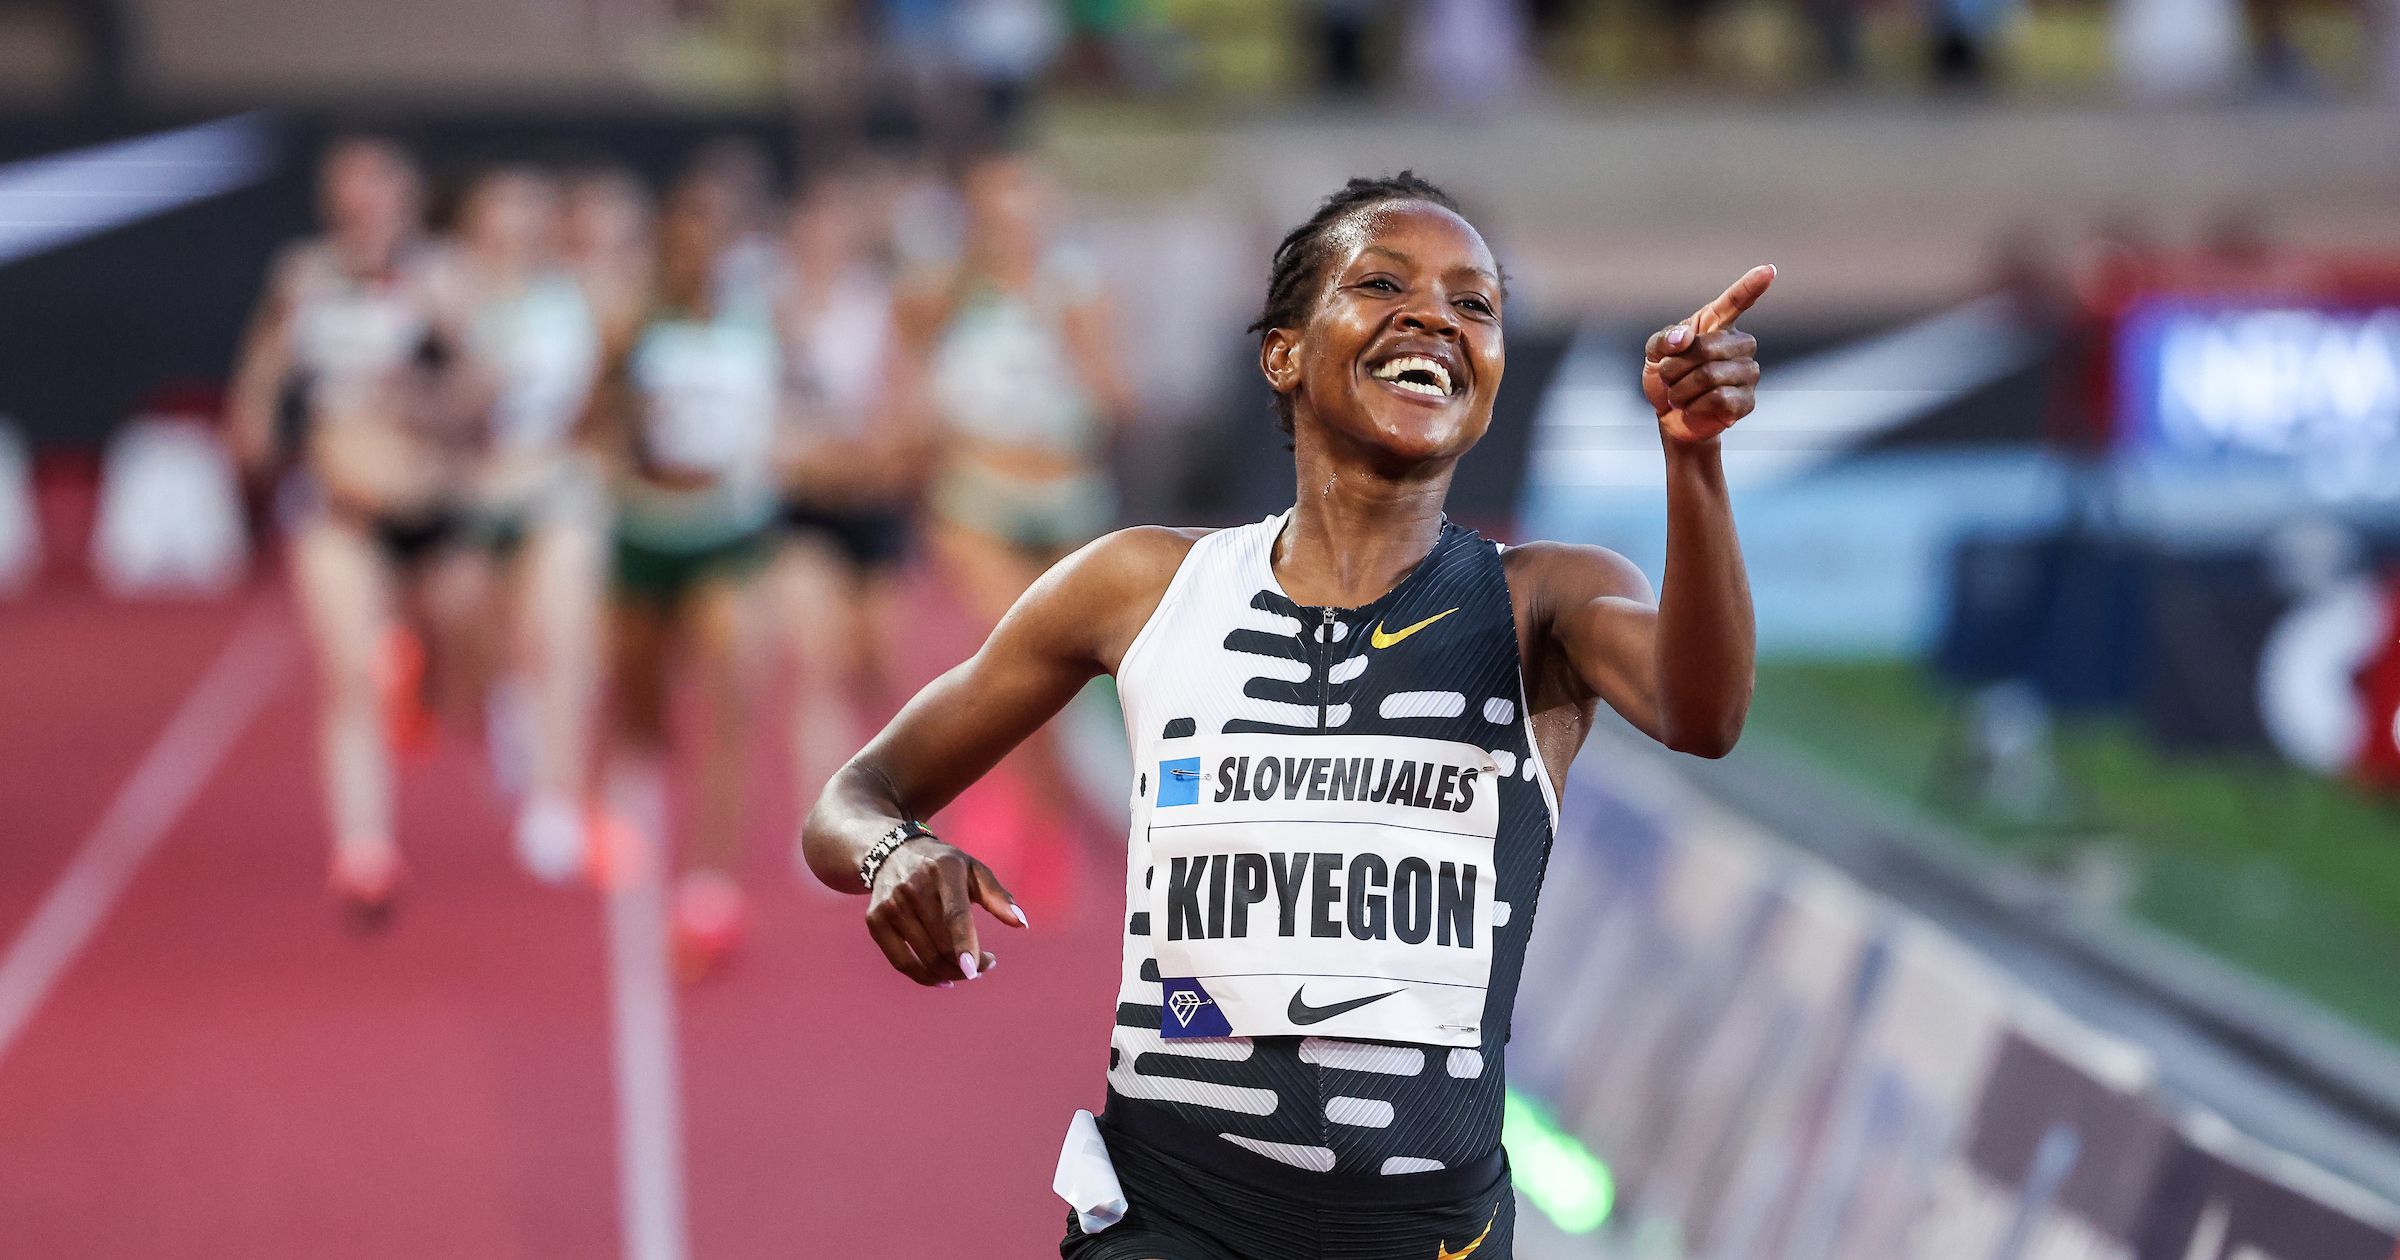 Athing Mu smashes U.S. record in women's 800m win at Prefontaine Classic